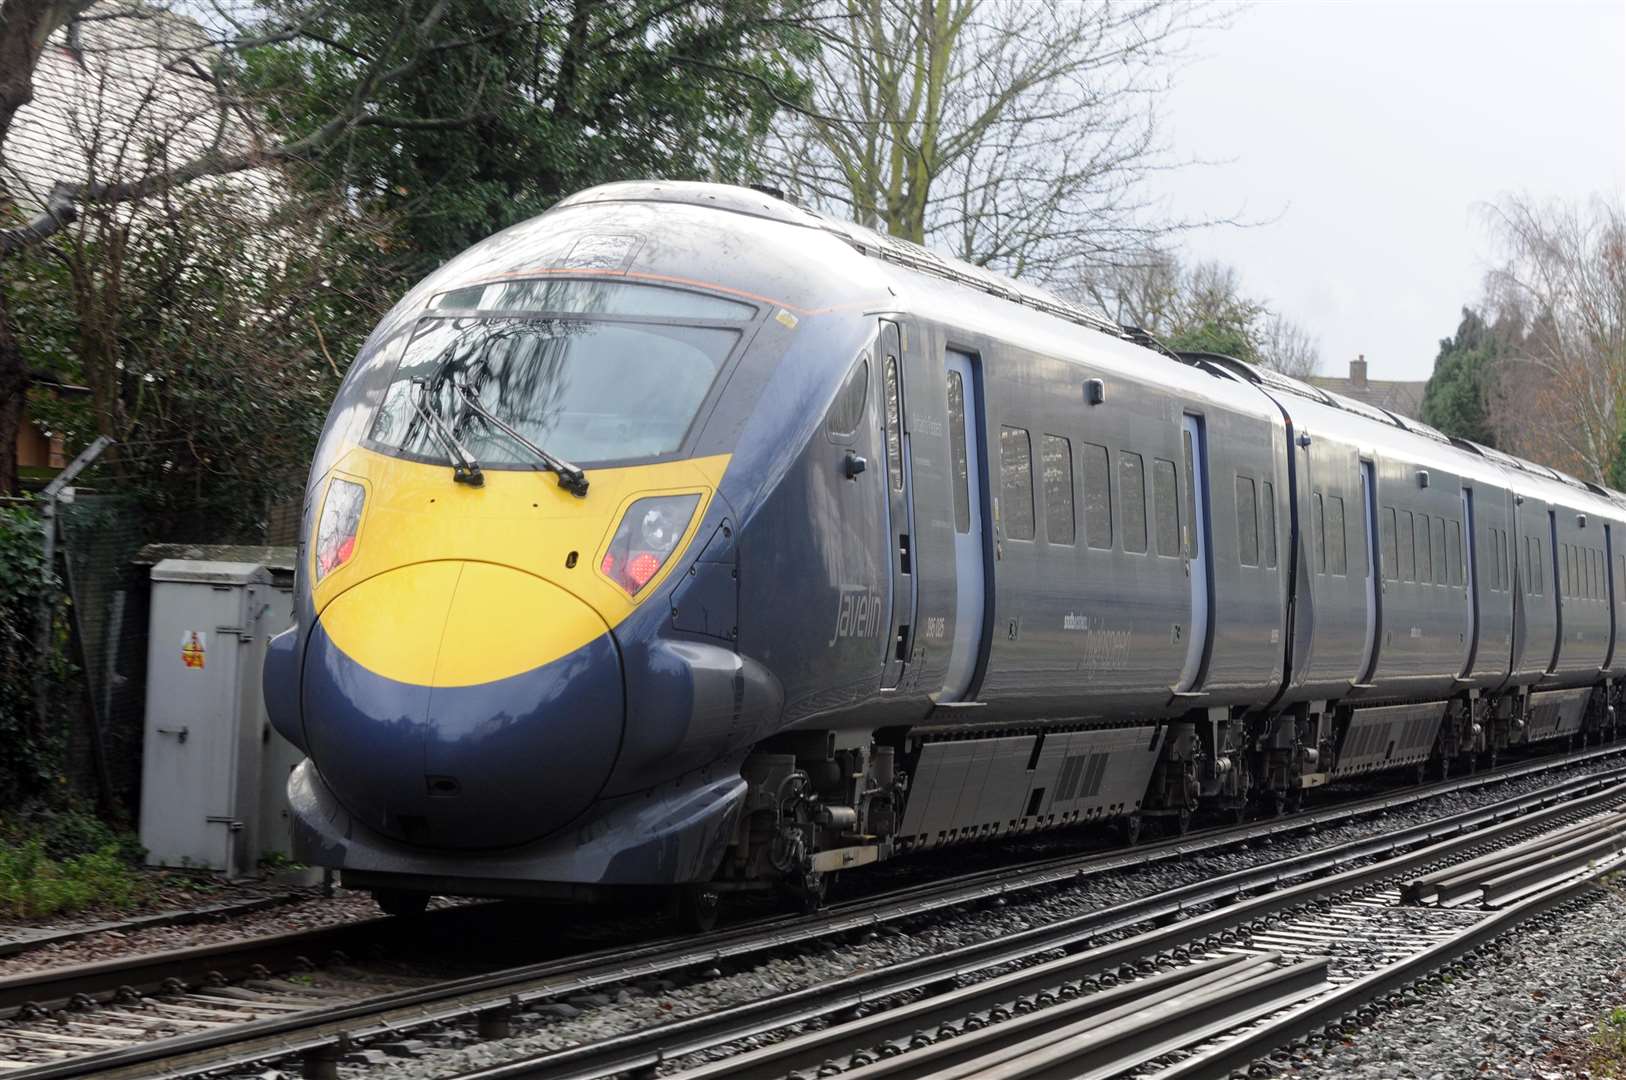 HS1 launched a decade ago